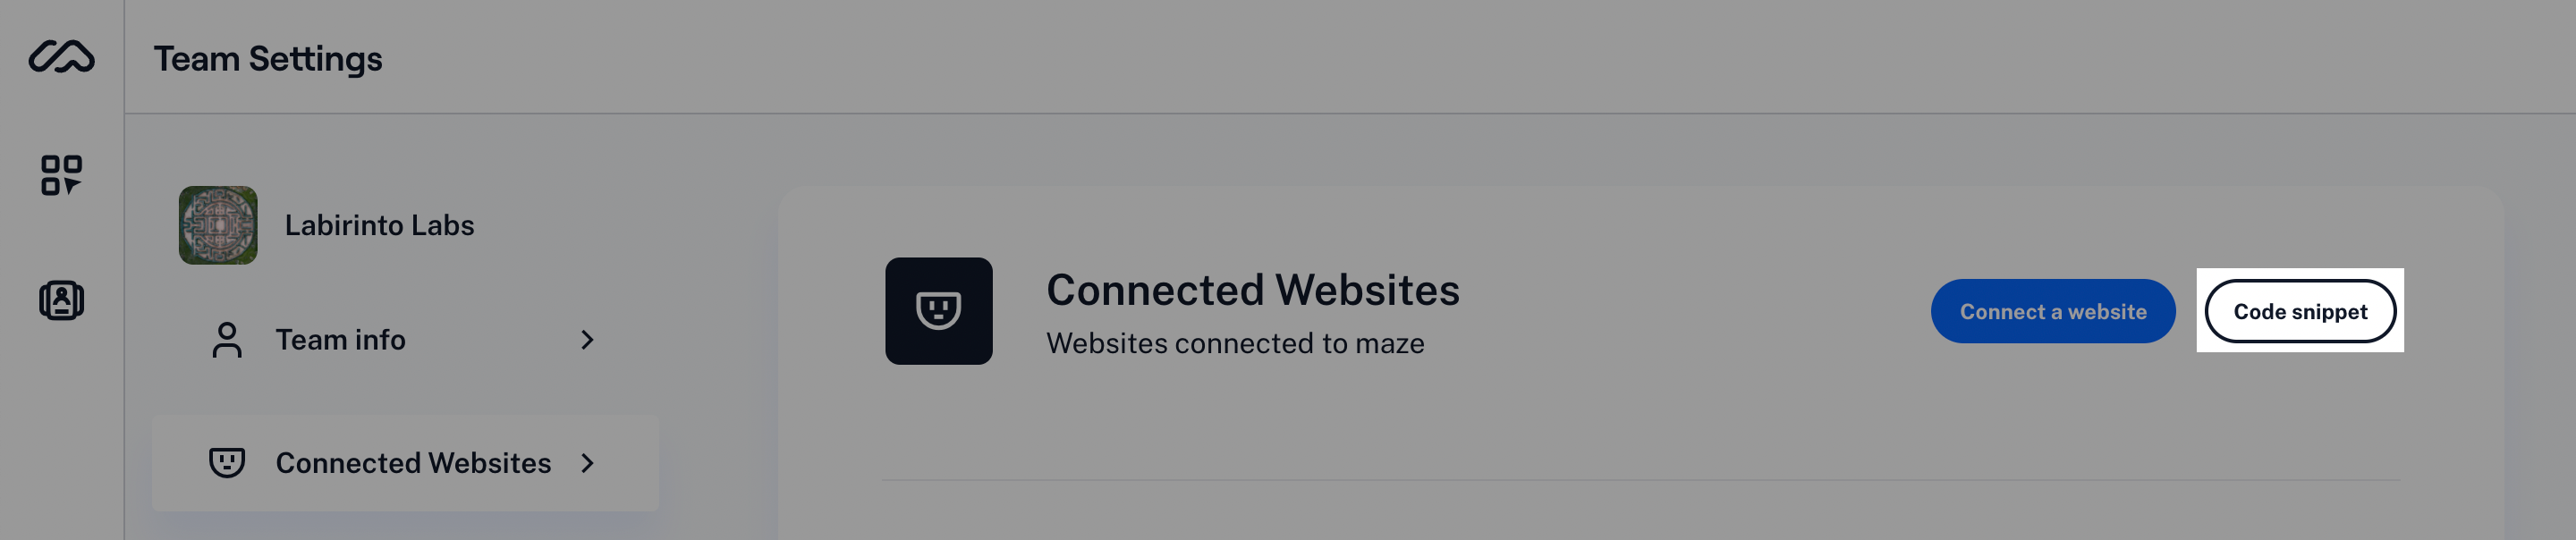 settings-connected-websites-see-snippet.png